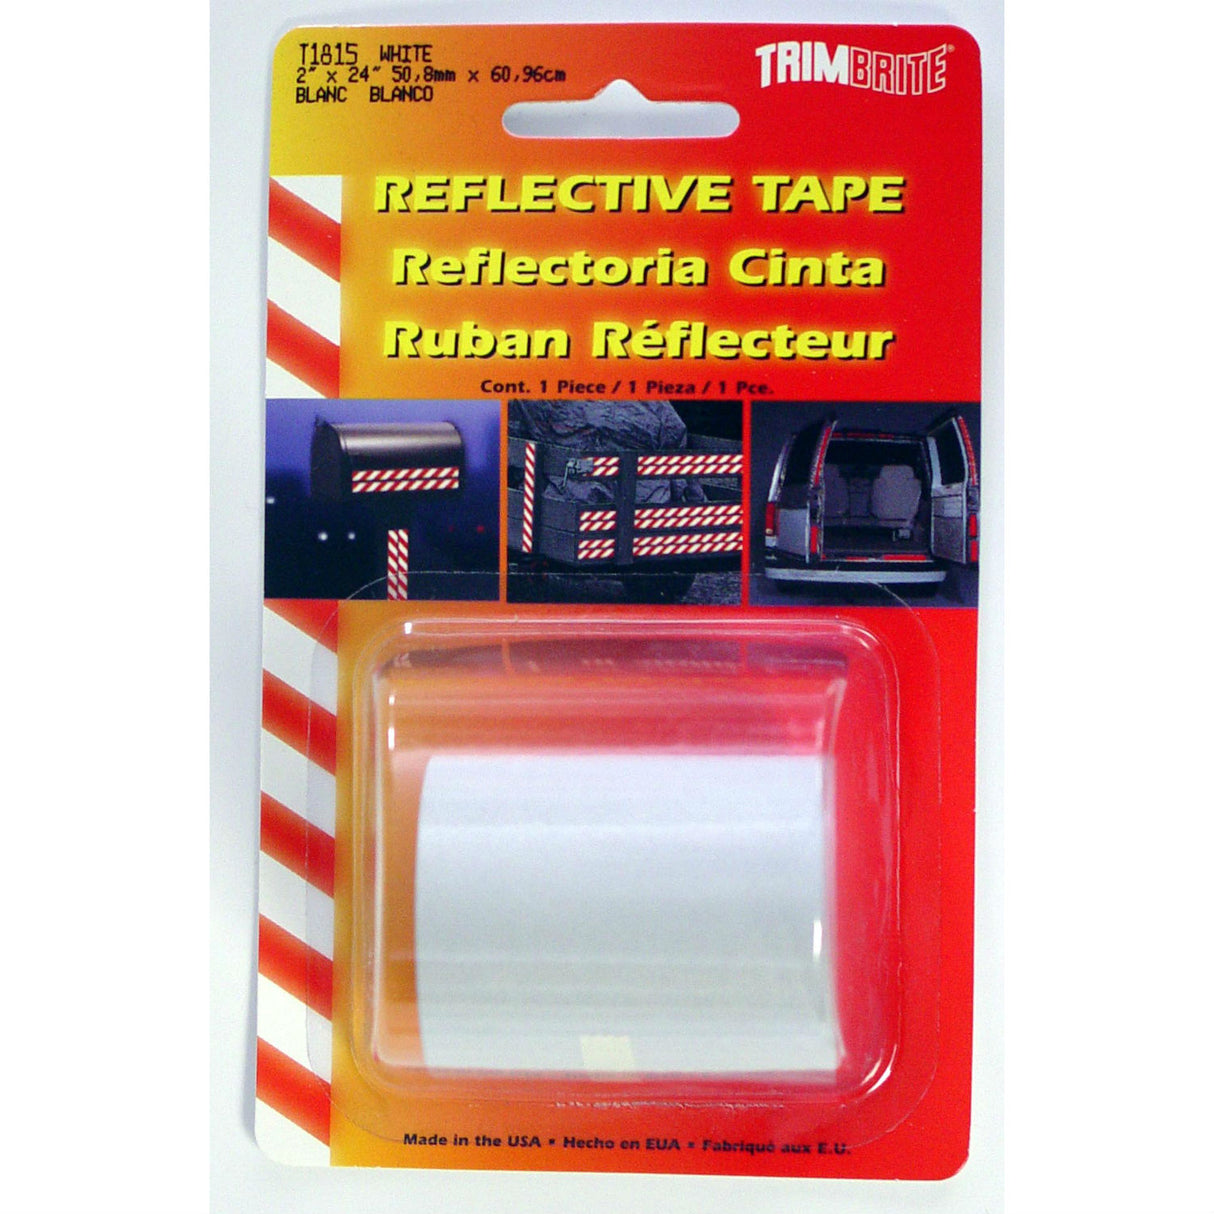 T1815 Reflective Tape